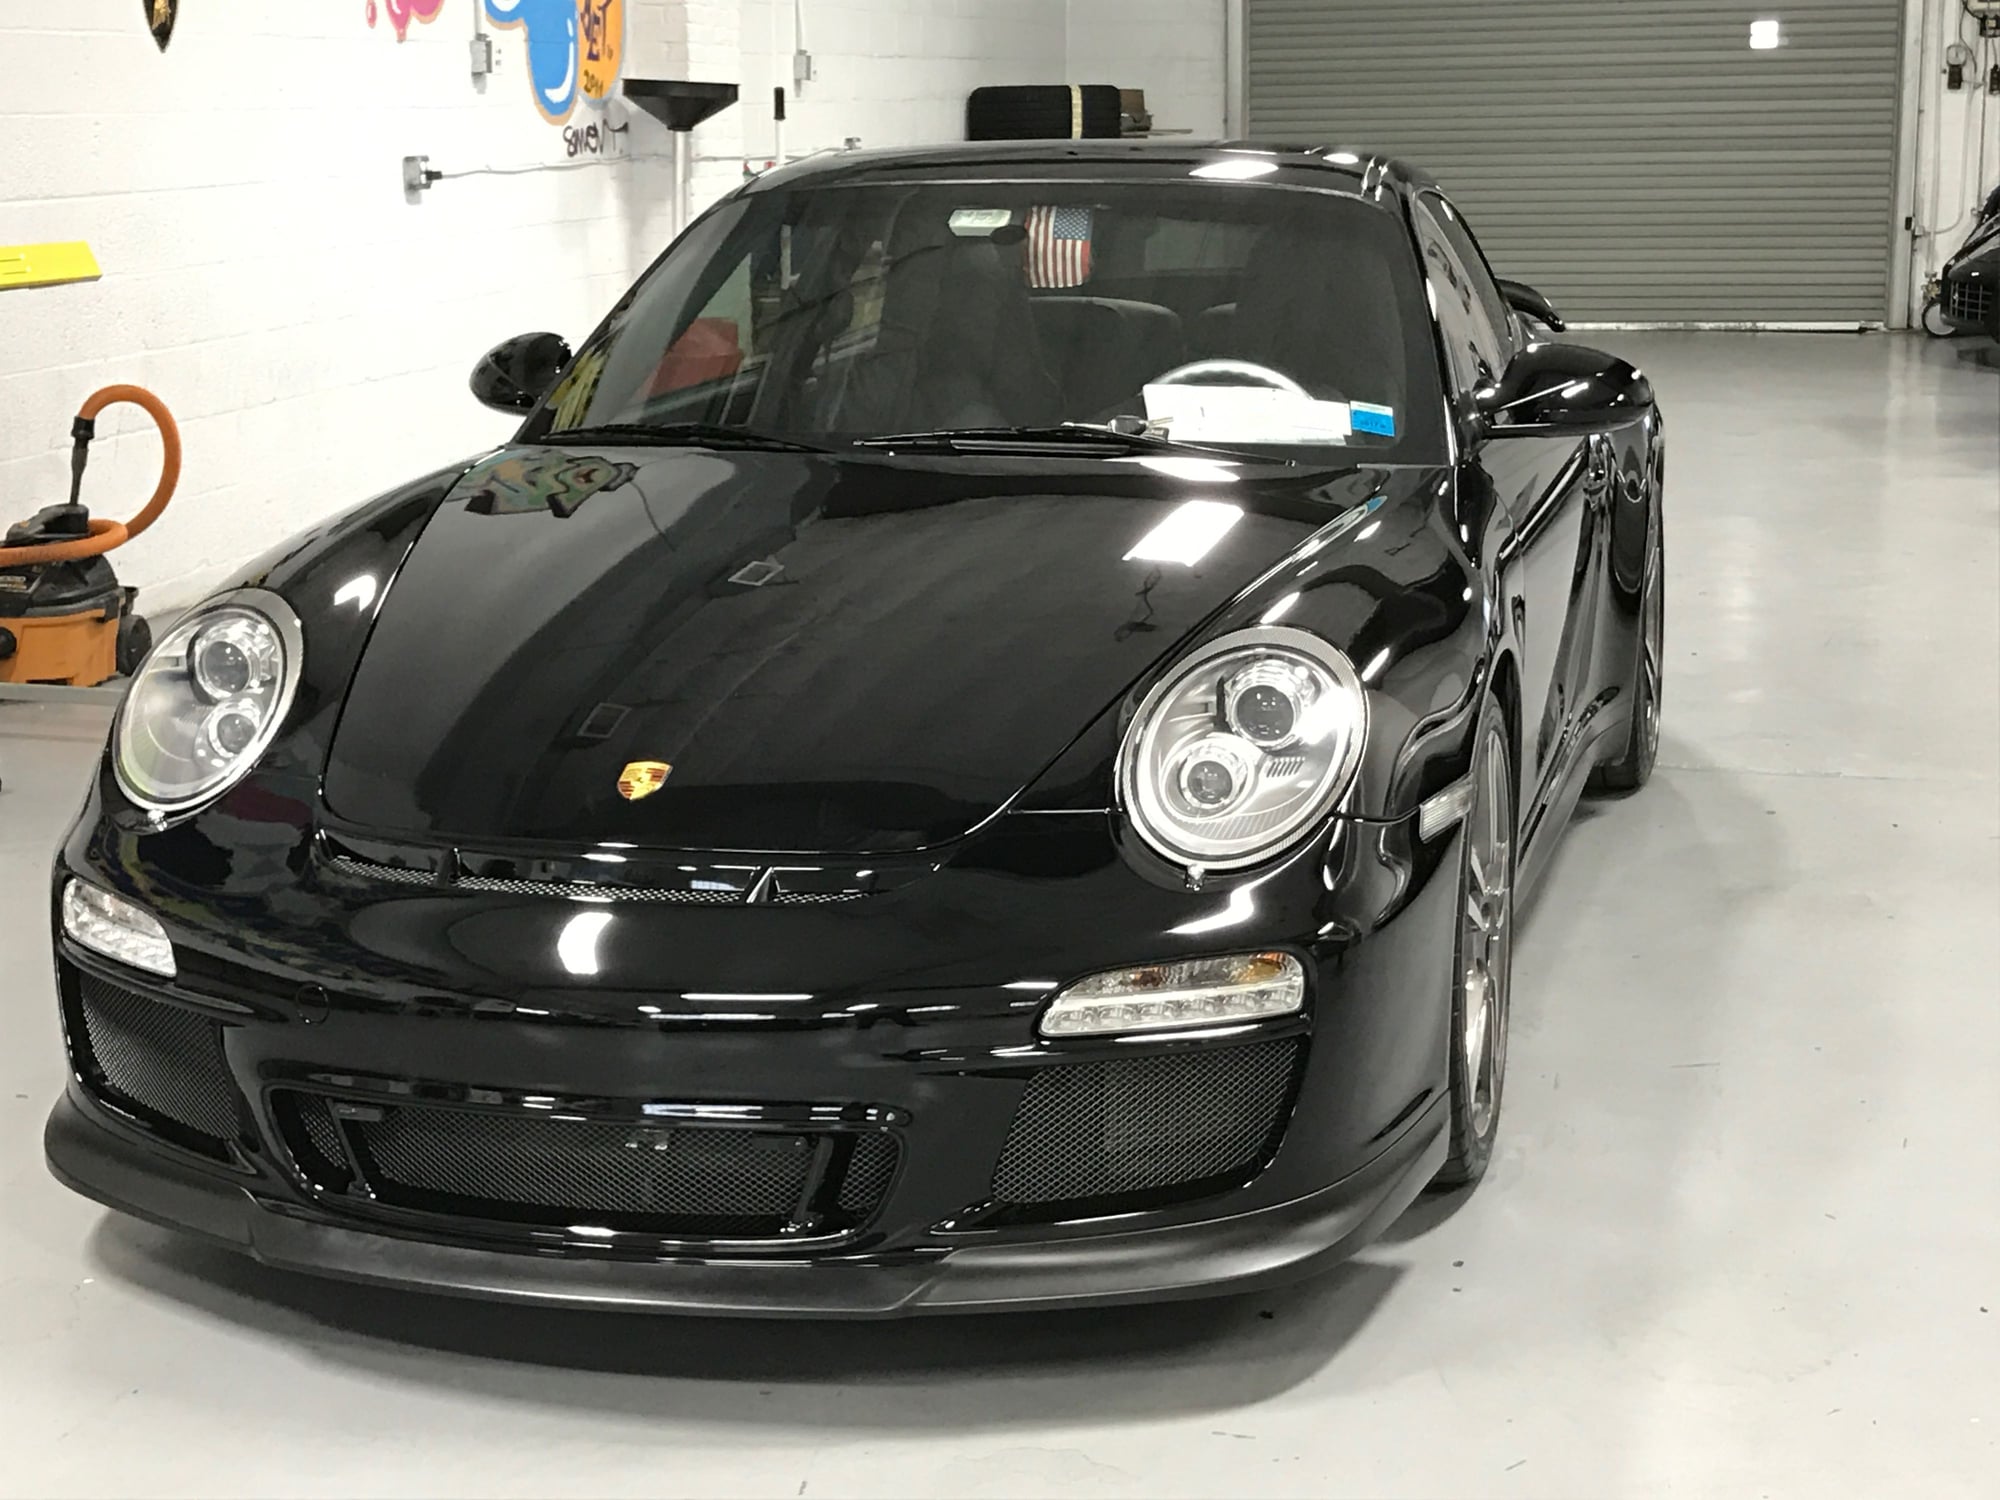 Exterior Body Parts - OEM ORIGINAL PORSCHE 997 GT3 FRONT BUMPER WITH VENTING AND FRONT FENDER LINER PERFECT - Used - 2009 to 2012 Porsche Carrera - New York, NY 10012, United States